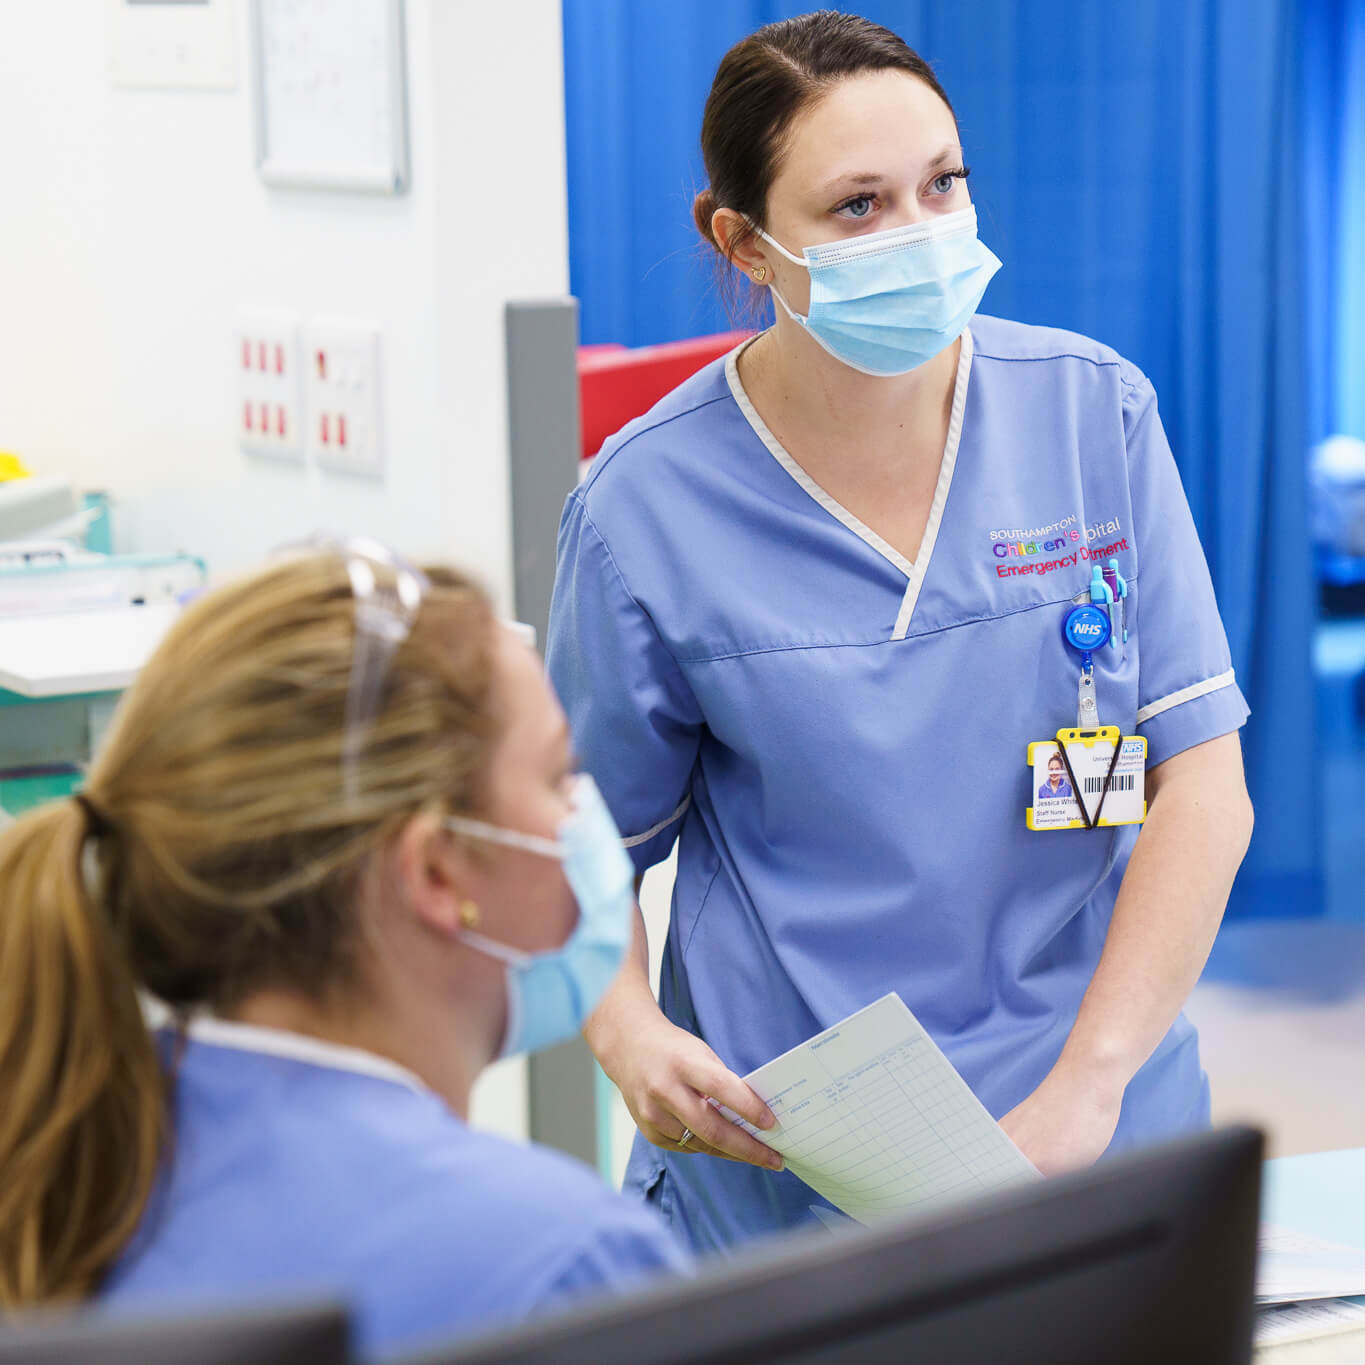 A female healthcare worker wearing a blue scrub and a mask discusses with another seated female colleague in a hospital setting. both are focused and attentive.